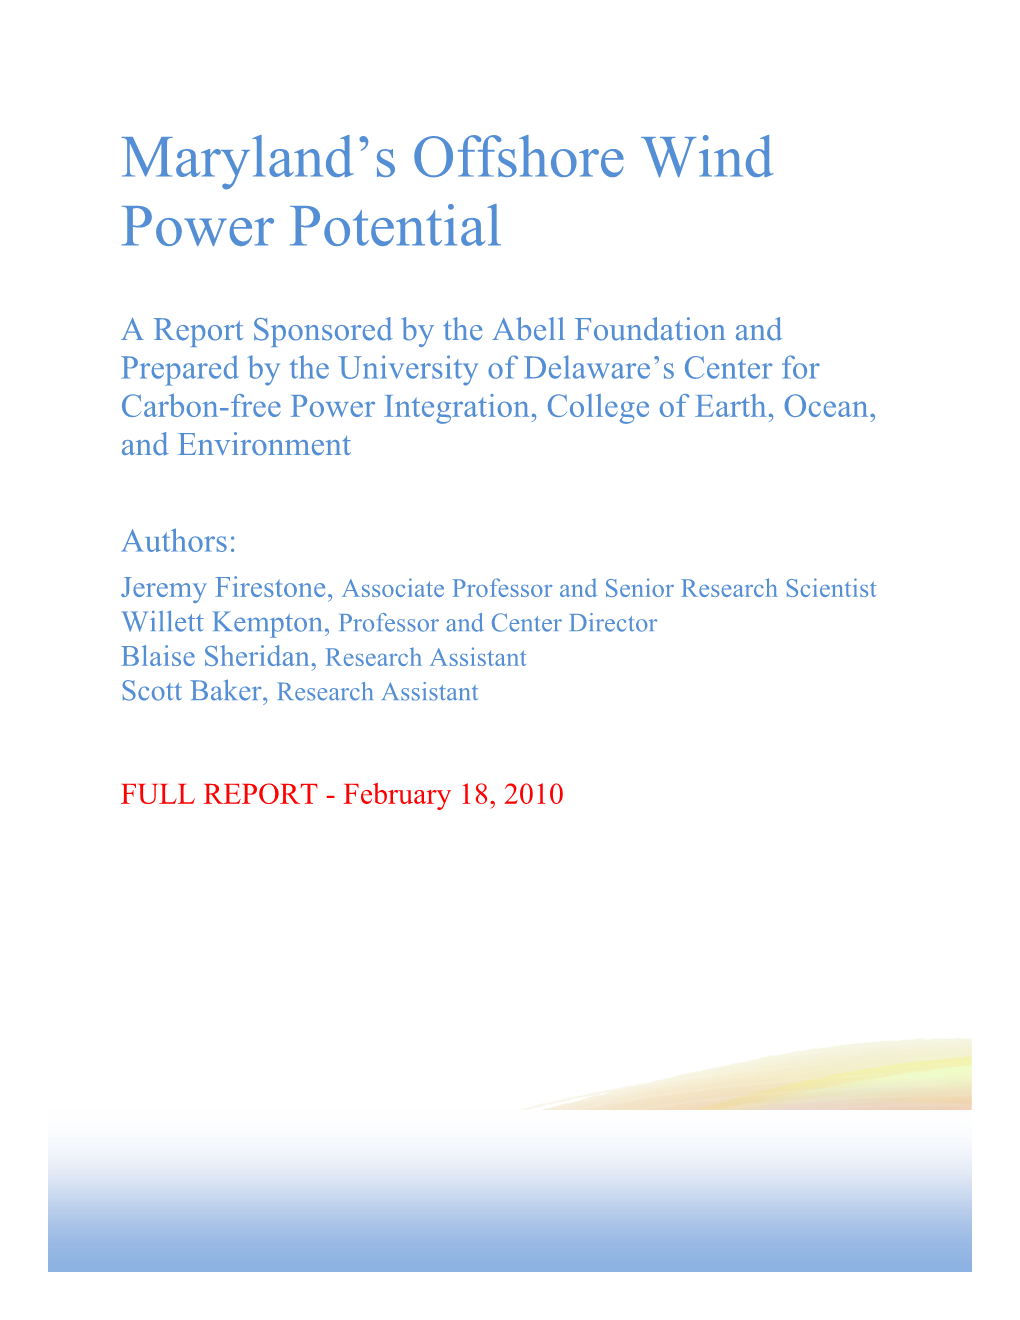 Maryland's Offshore Wind Power Potential